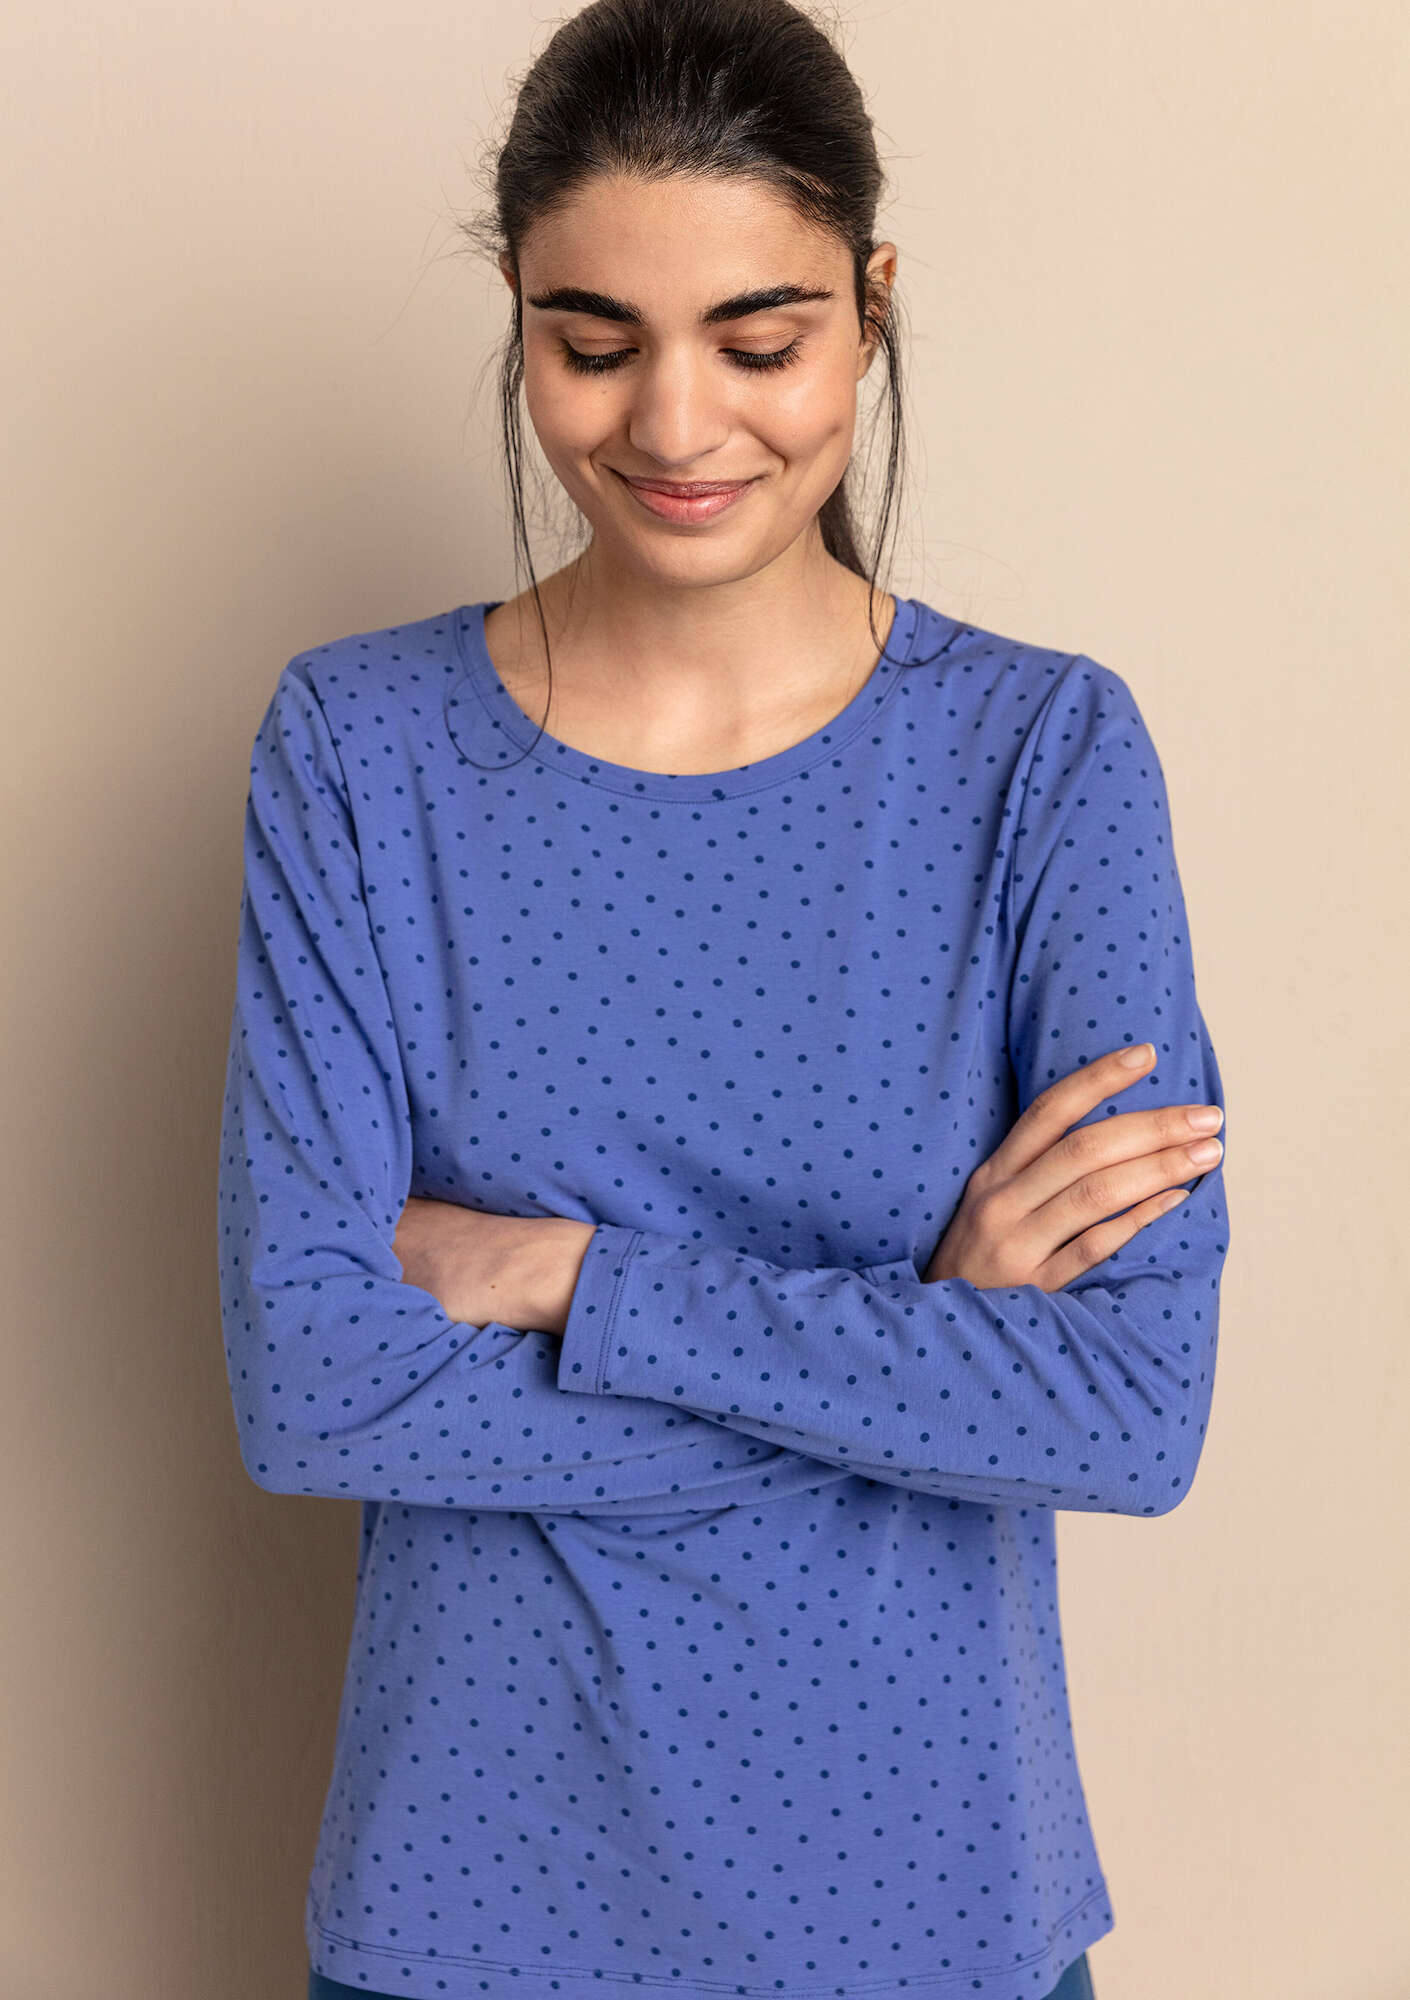 Tricot top Pytte sky blue/patterned